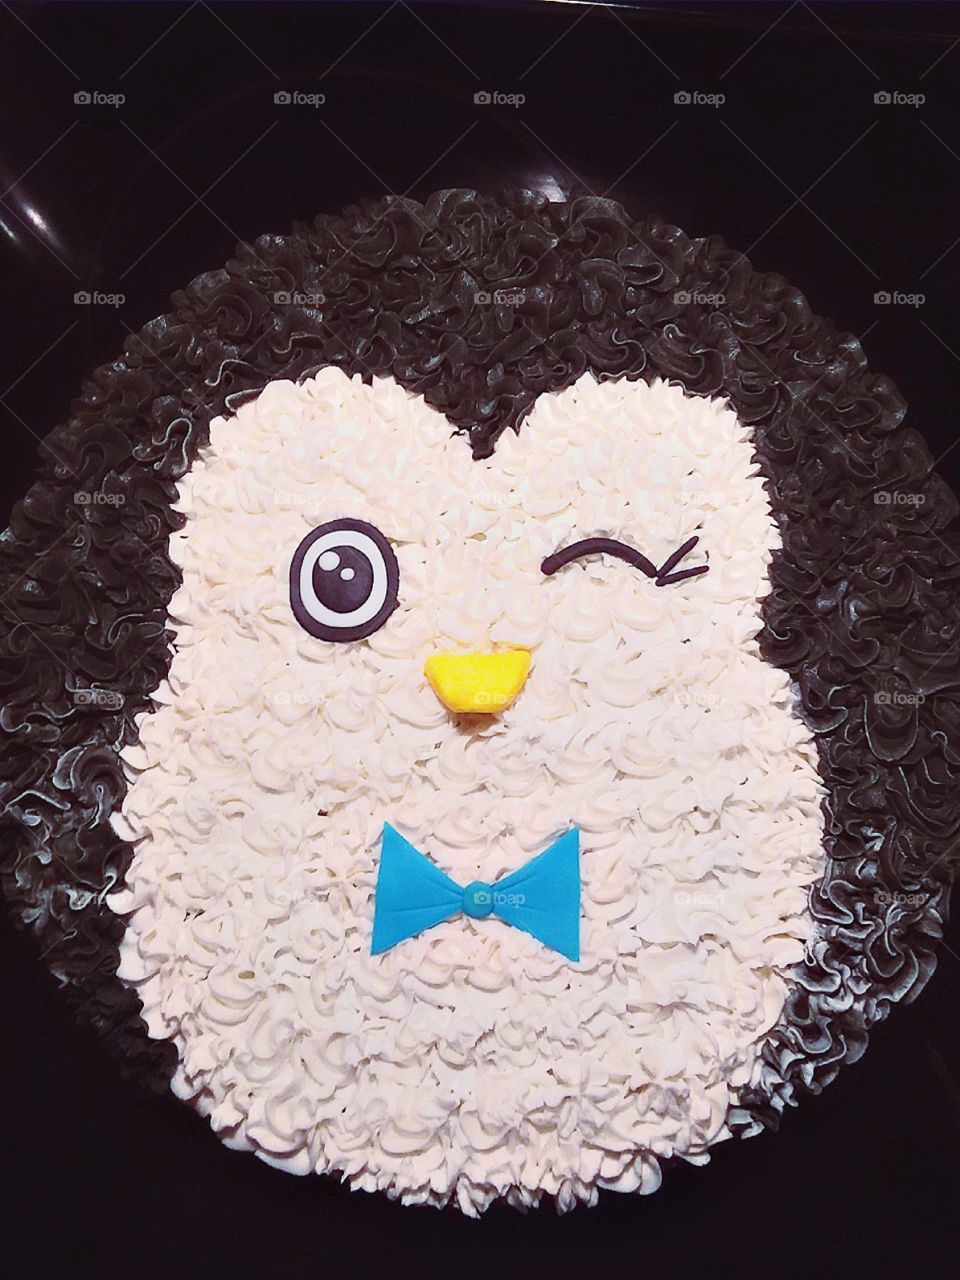 Stunning winter cookie cake decorated like a penguin winking and wearing a bowtie